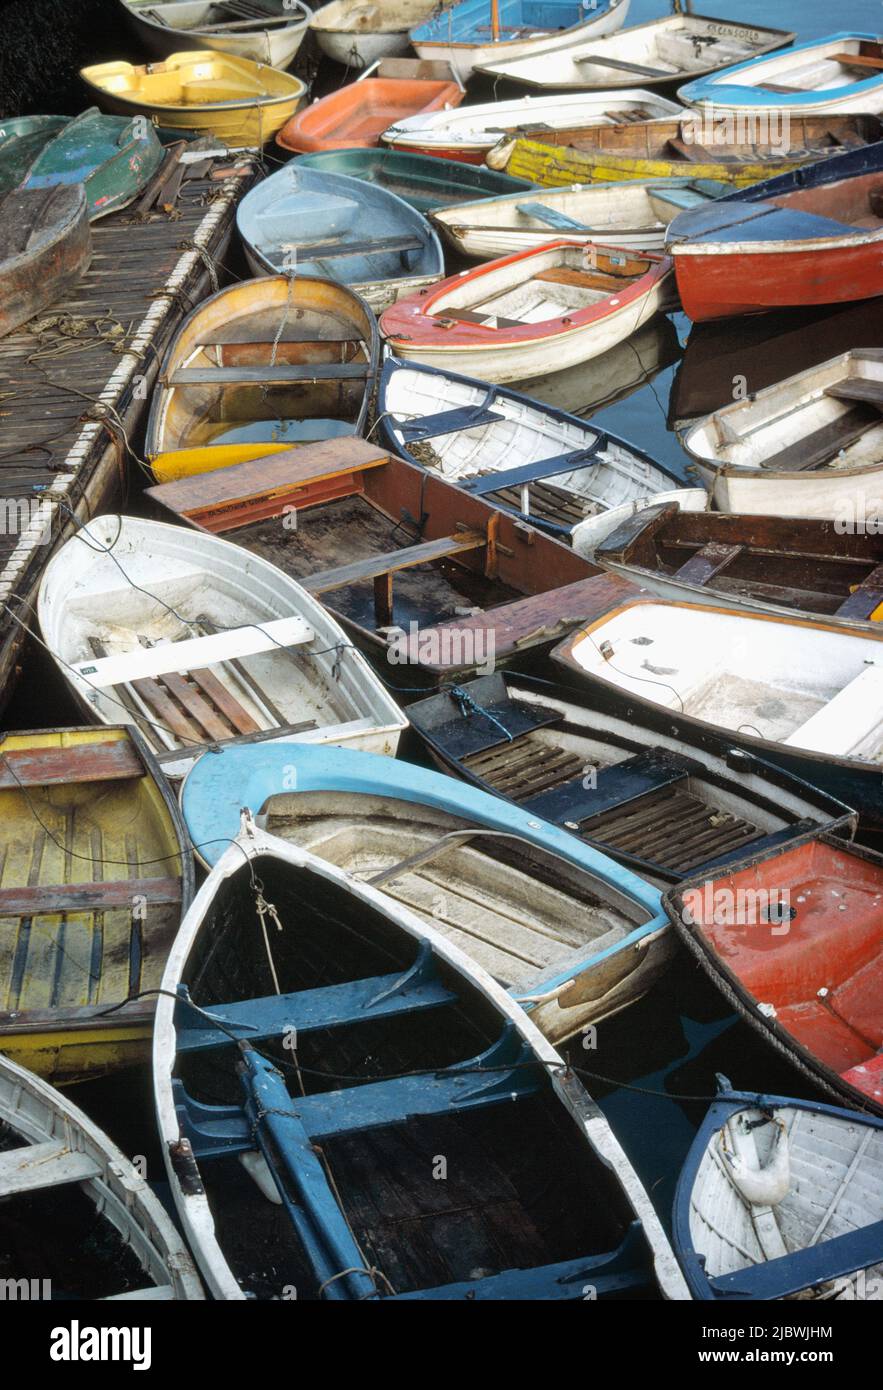 Wooden boats, Whitby, England. Stock Photo